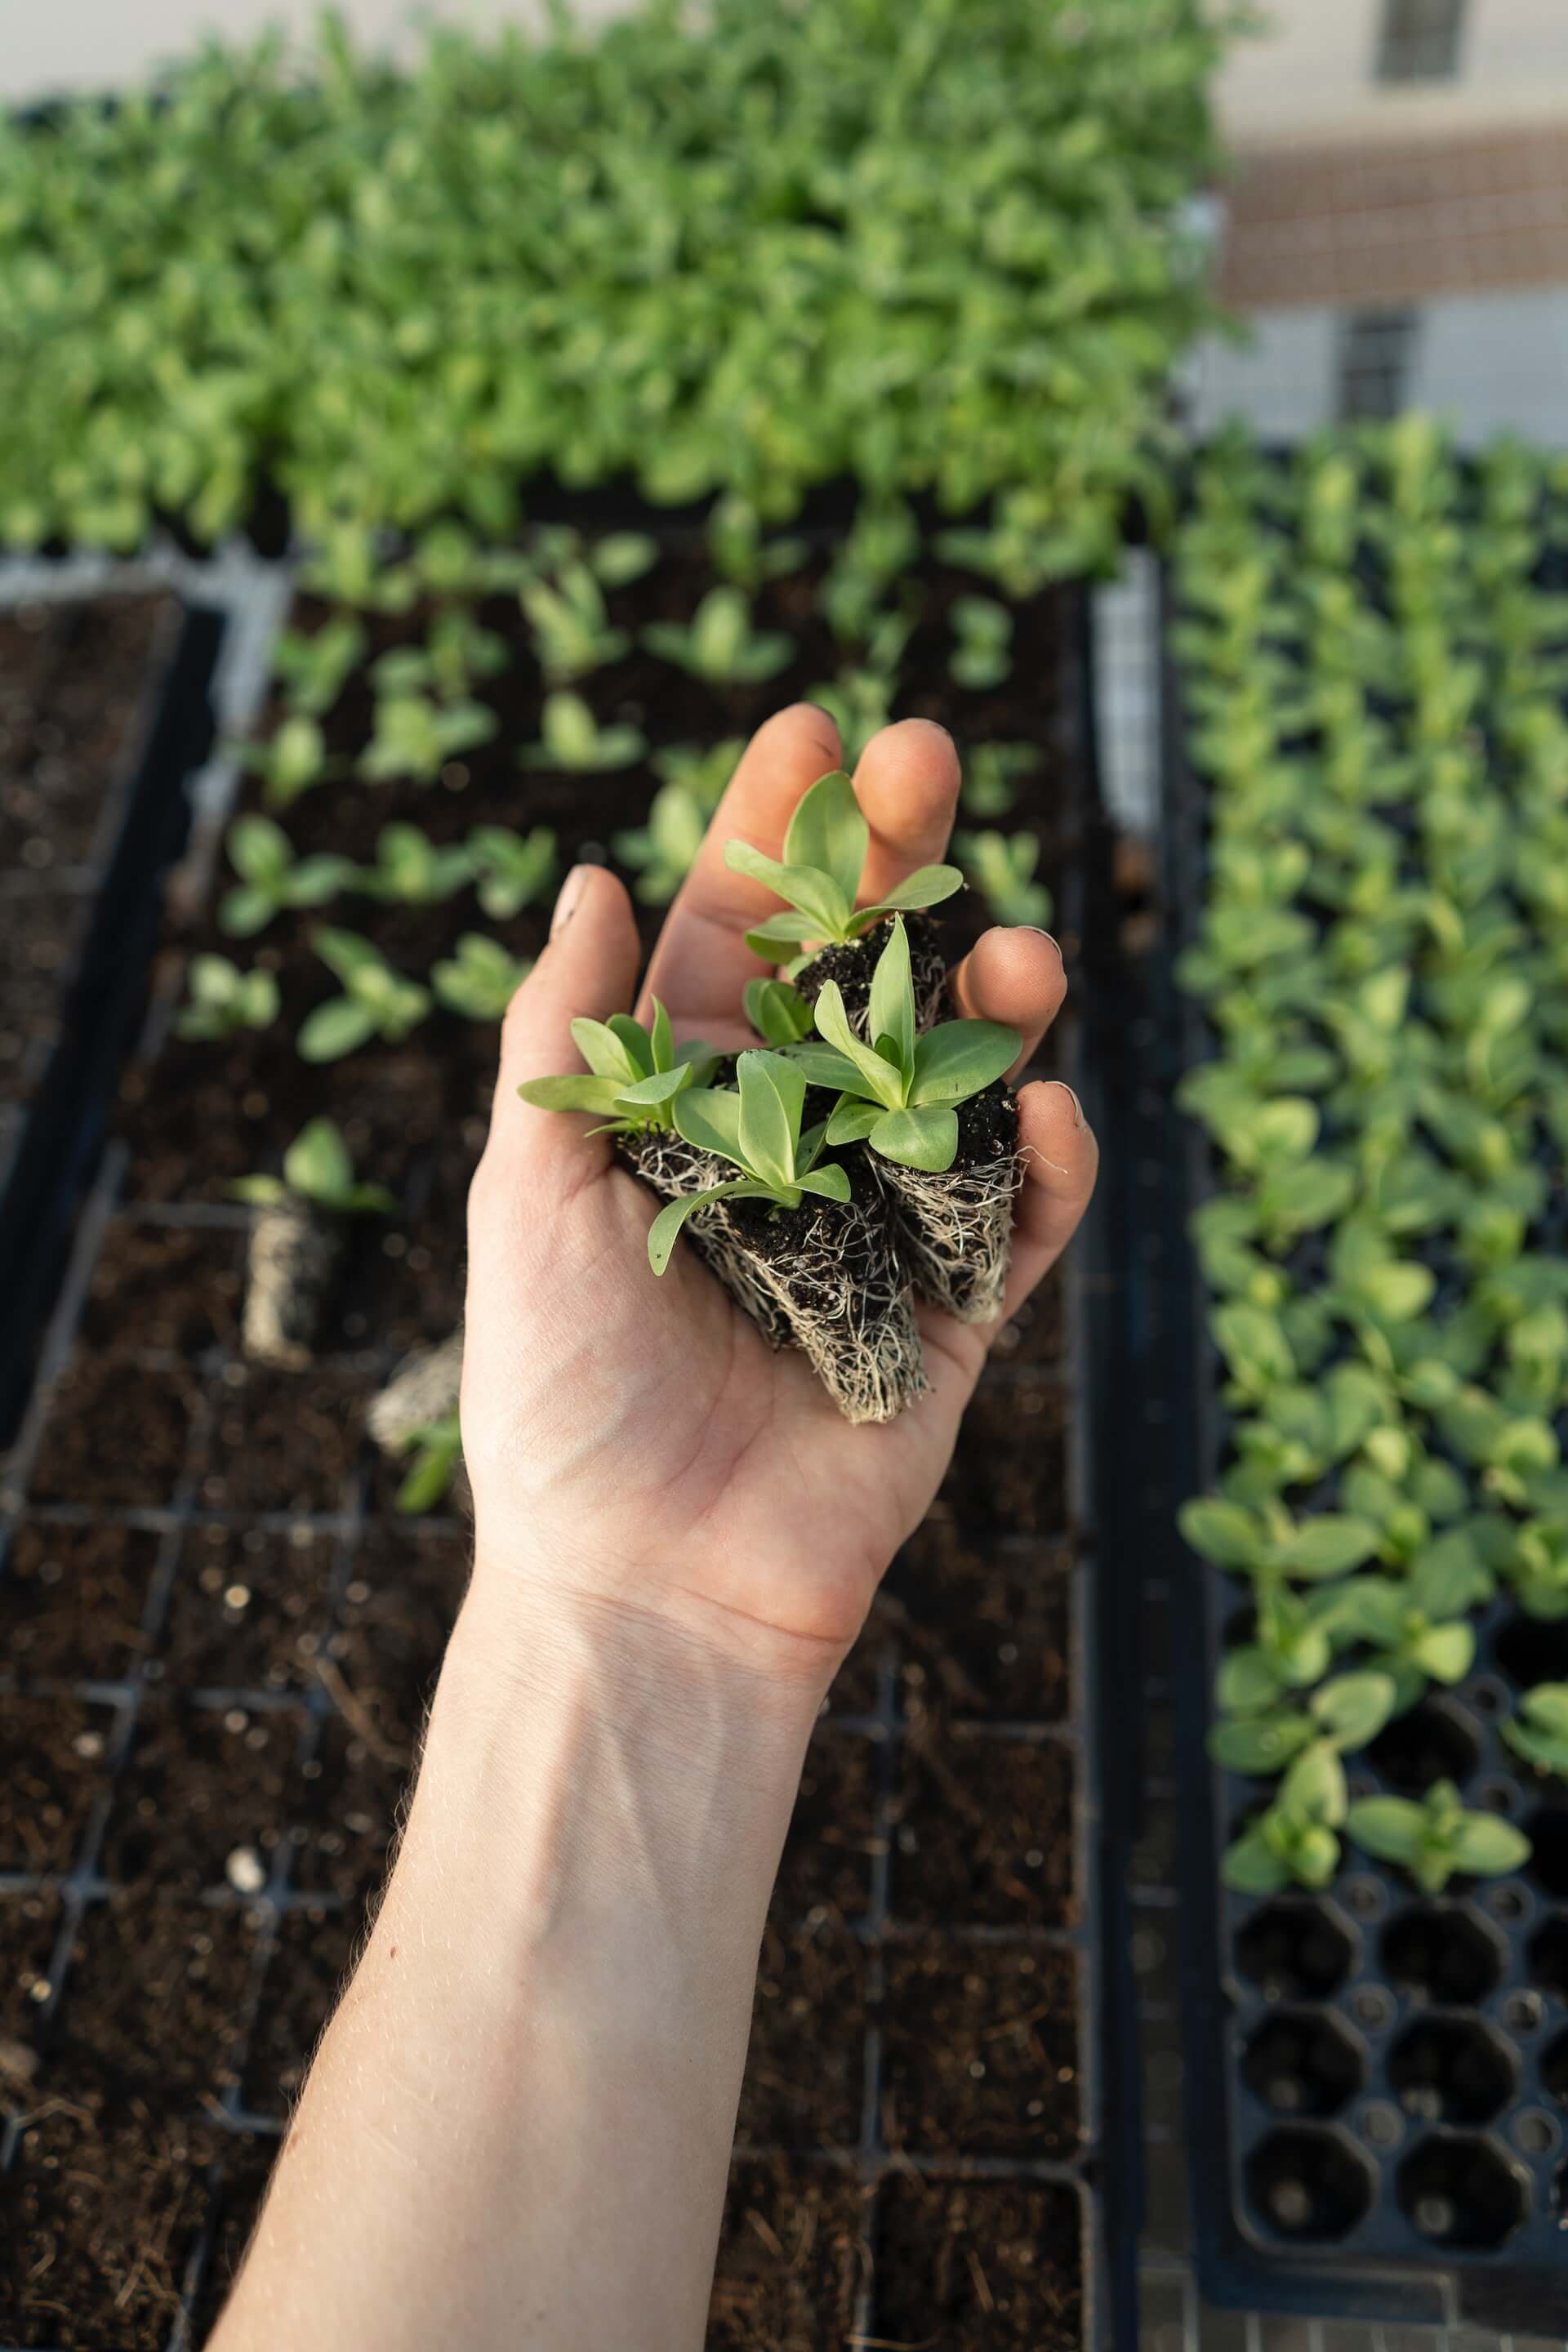 Plant plugs for food production startup